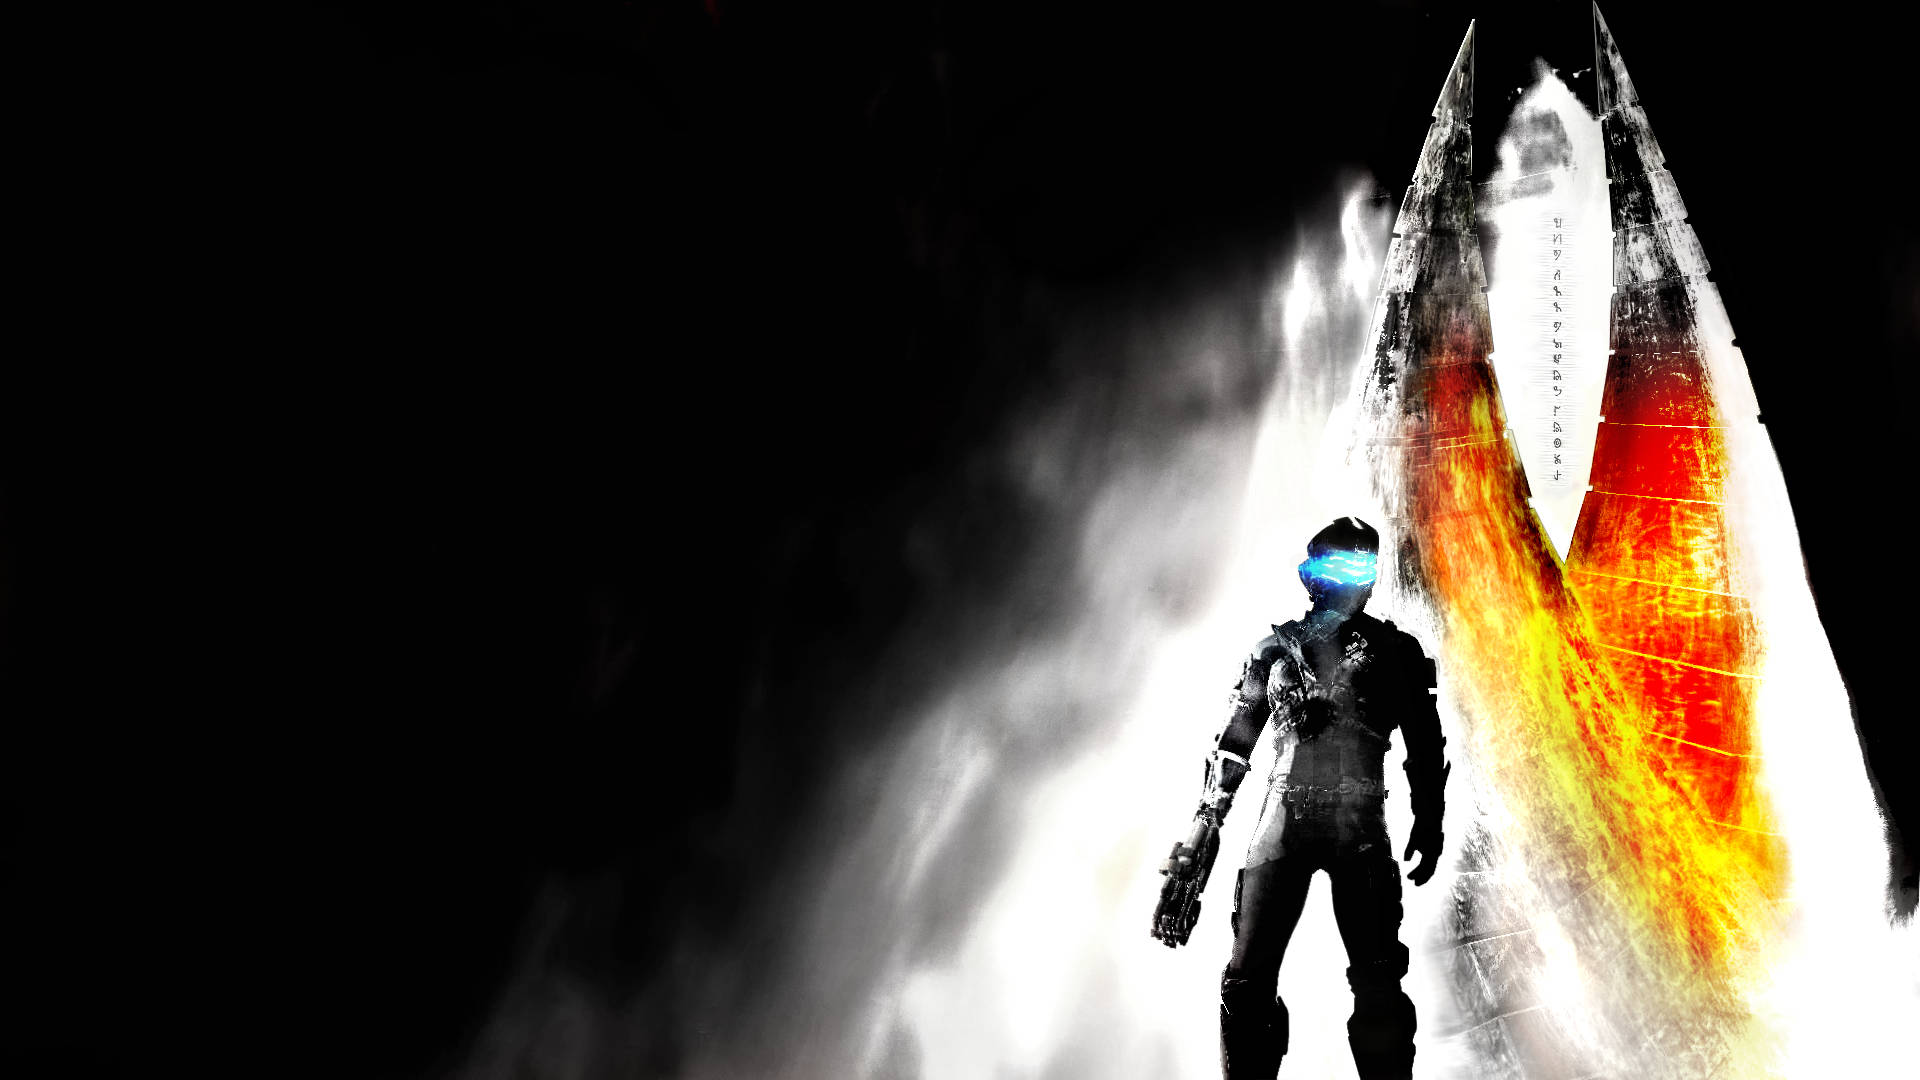 Dead Space Marker And Isaac Wallpaper